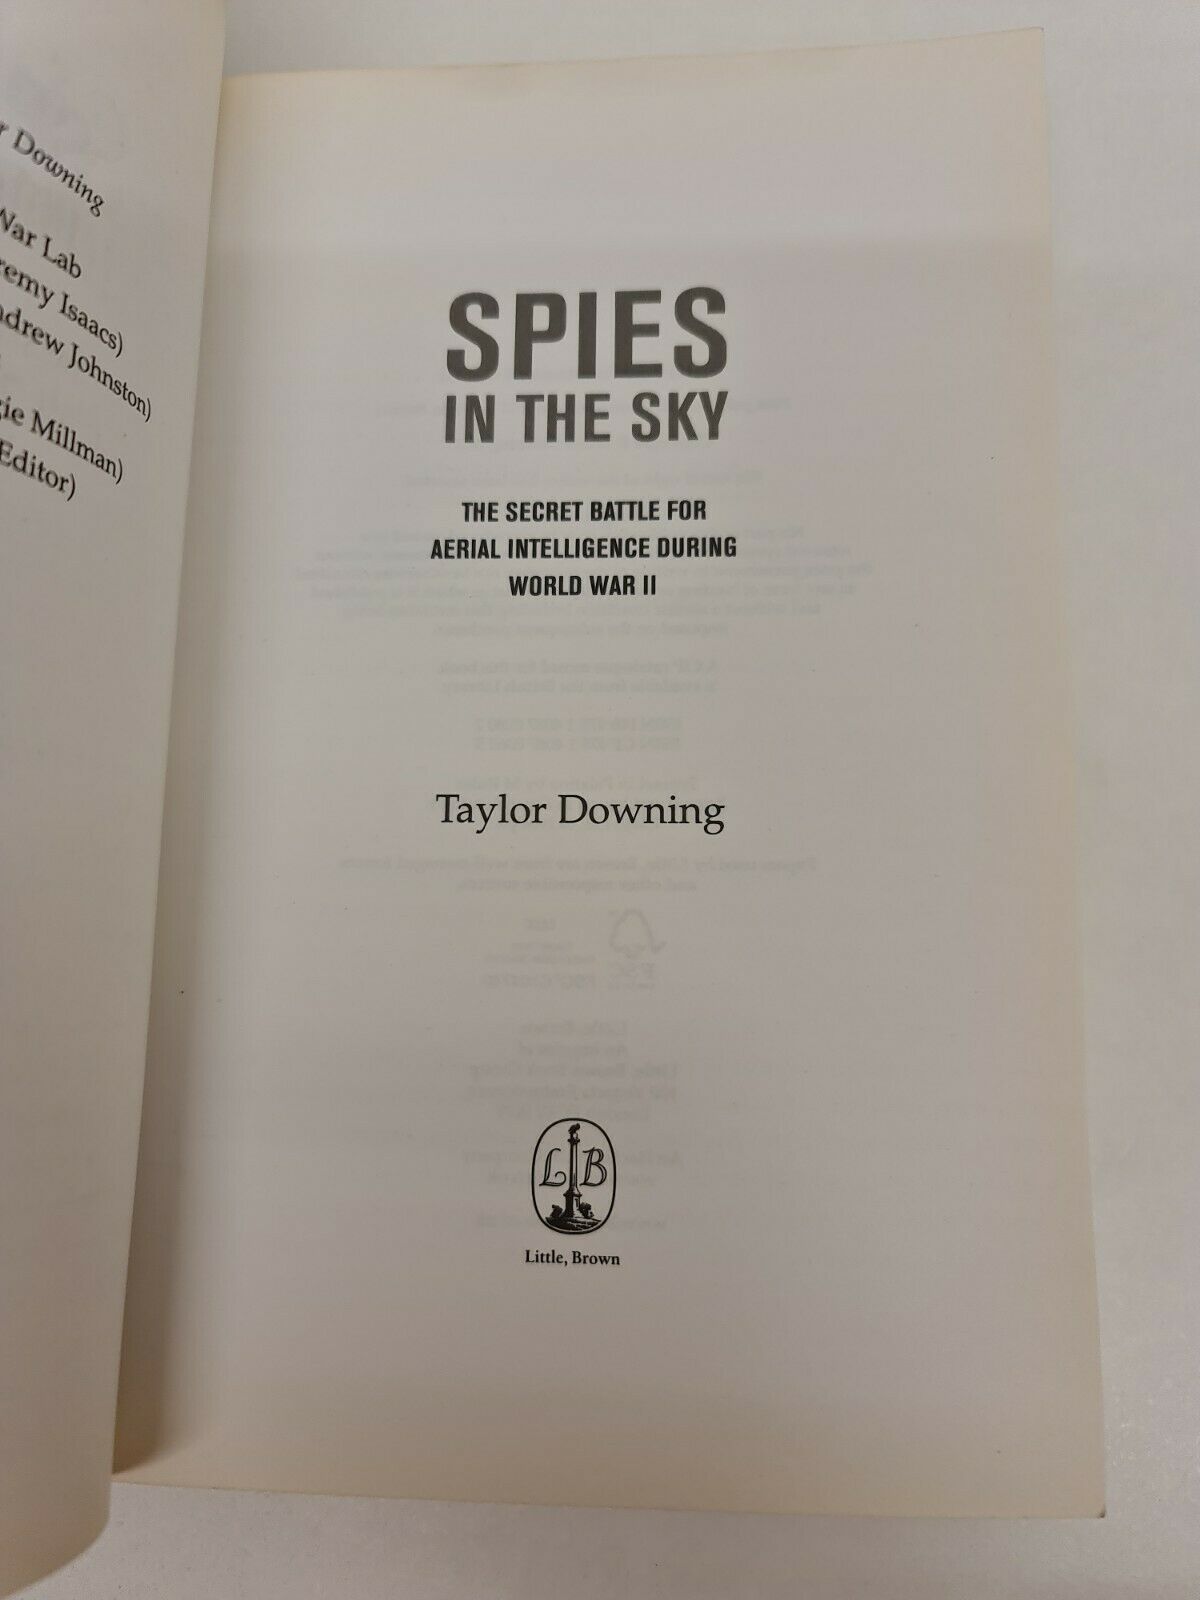 Spies In The Sky: The Secret Battle for Aerial Intelligence During World War II by Taylor Downing